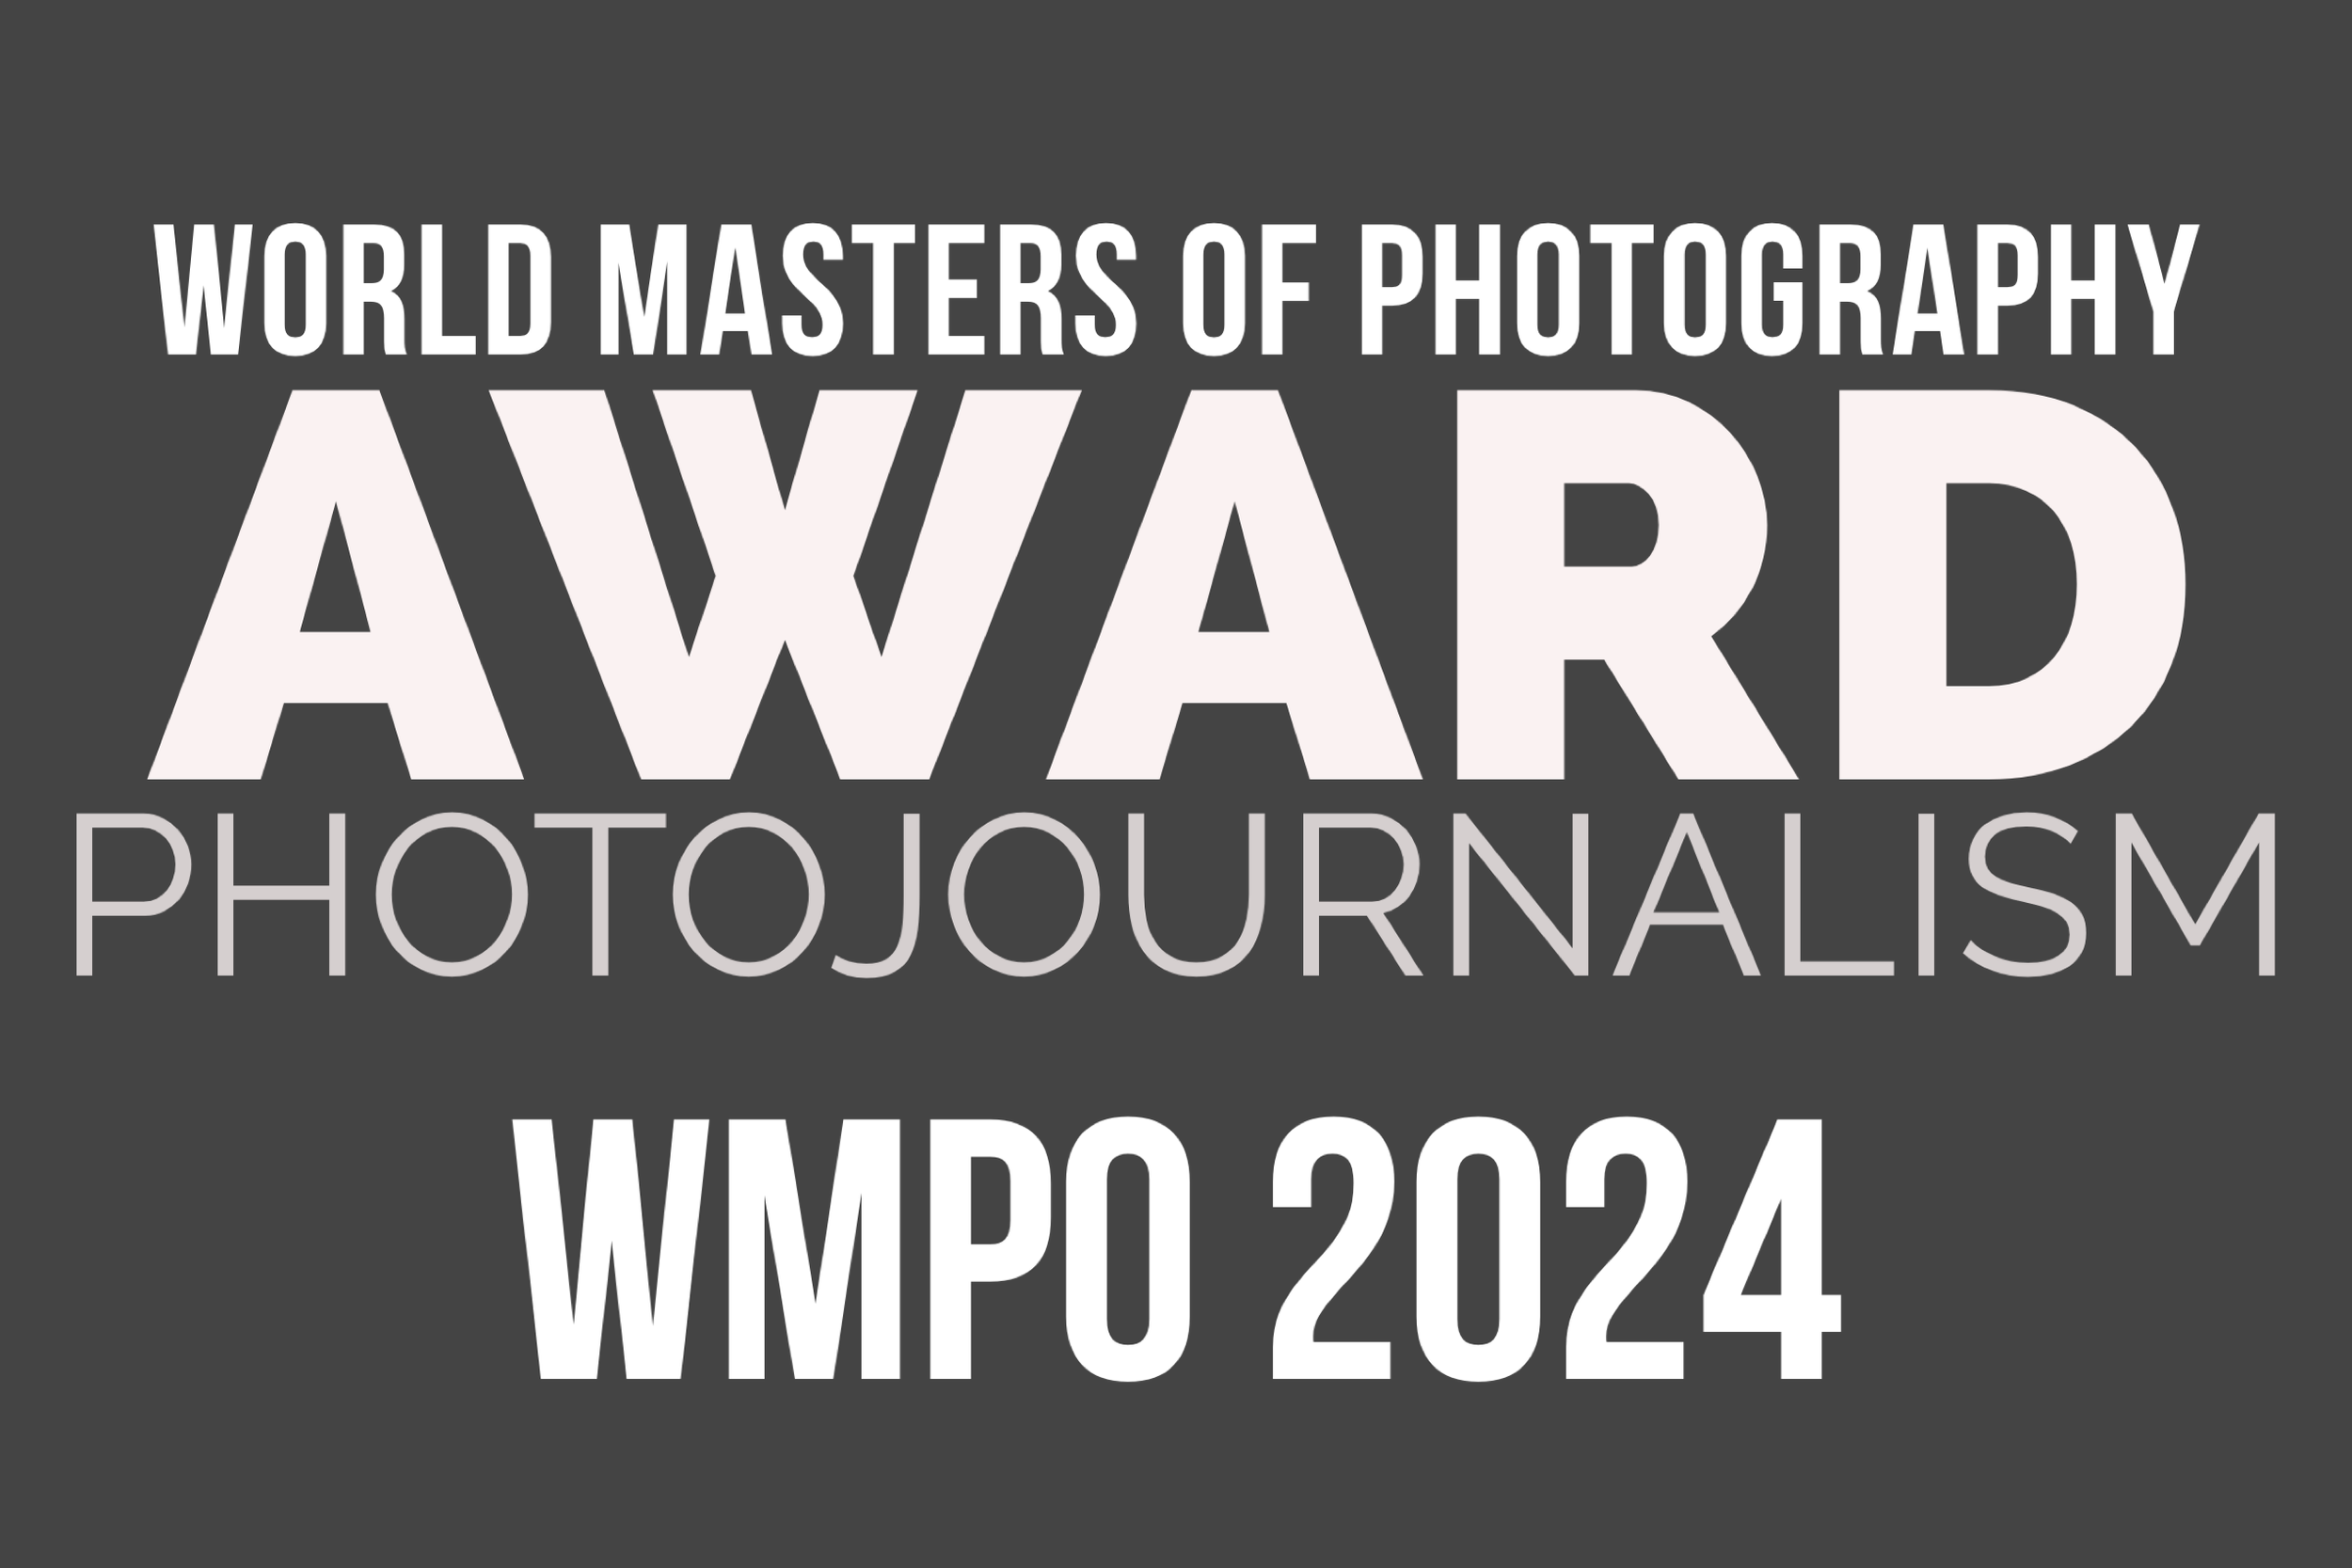 WMPO Photo Awards 2024 - World Masters of Photography Awards002.PNG